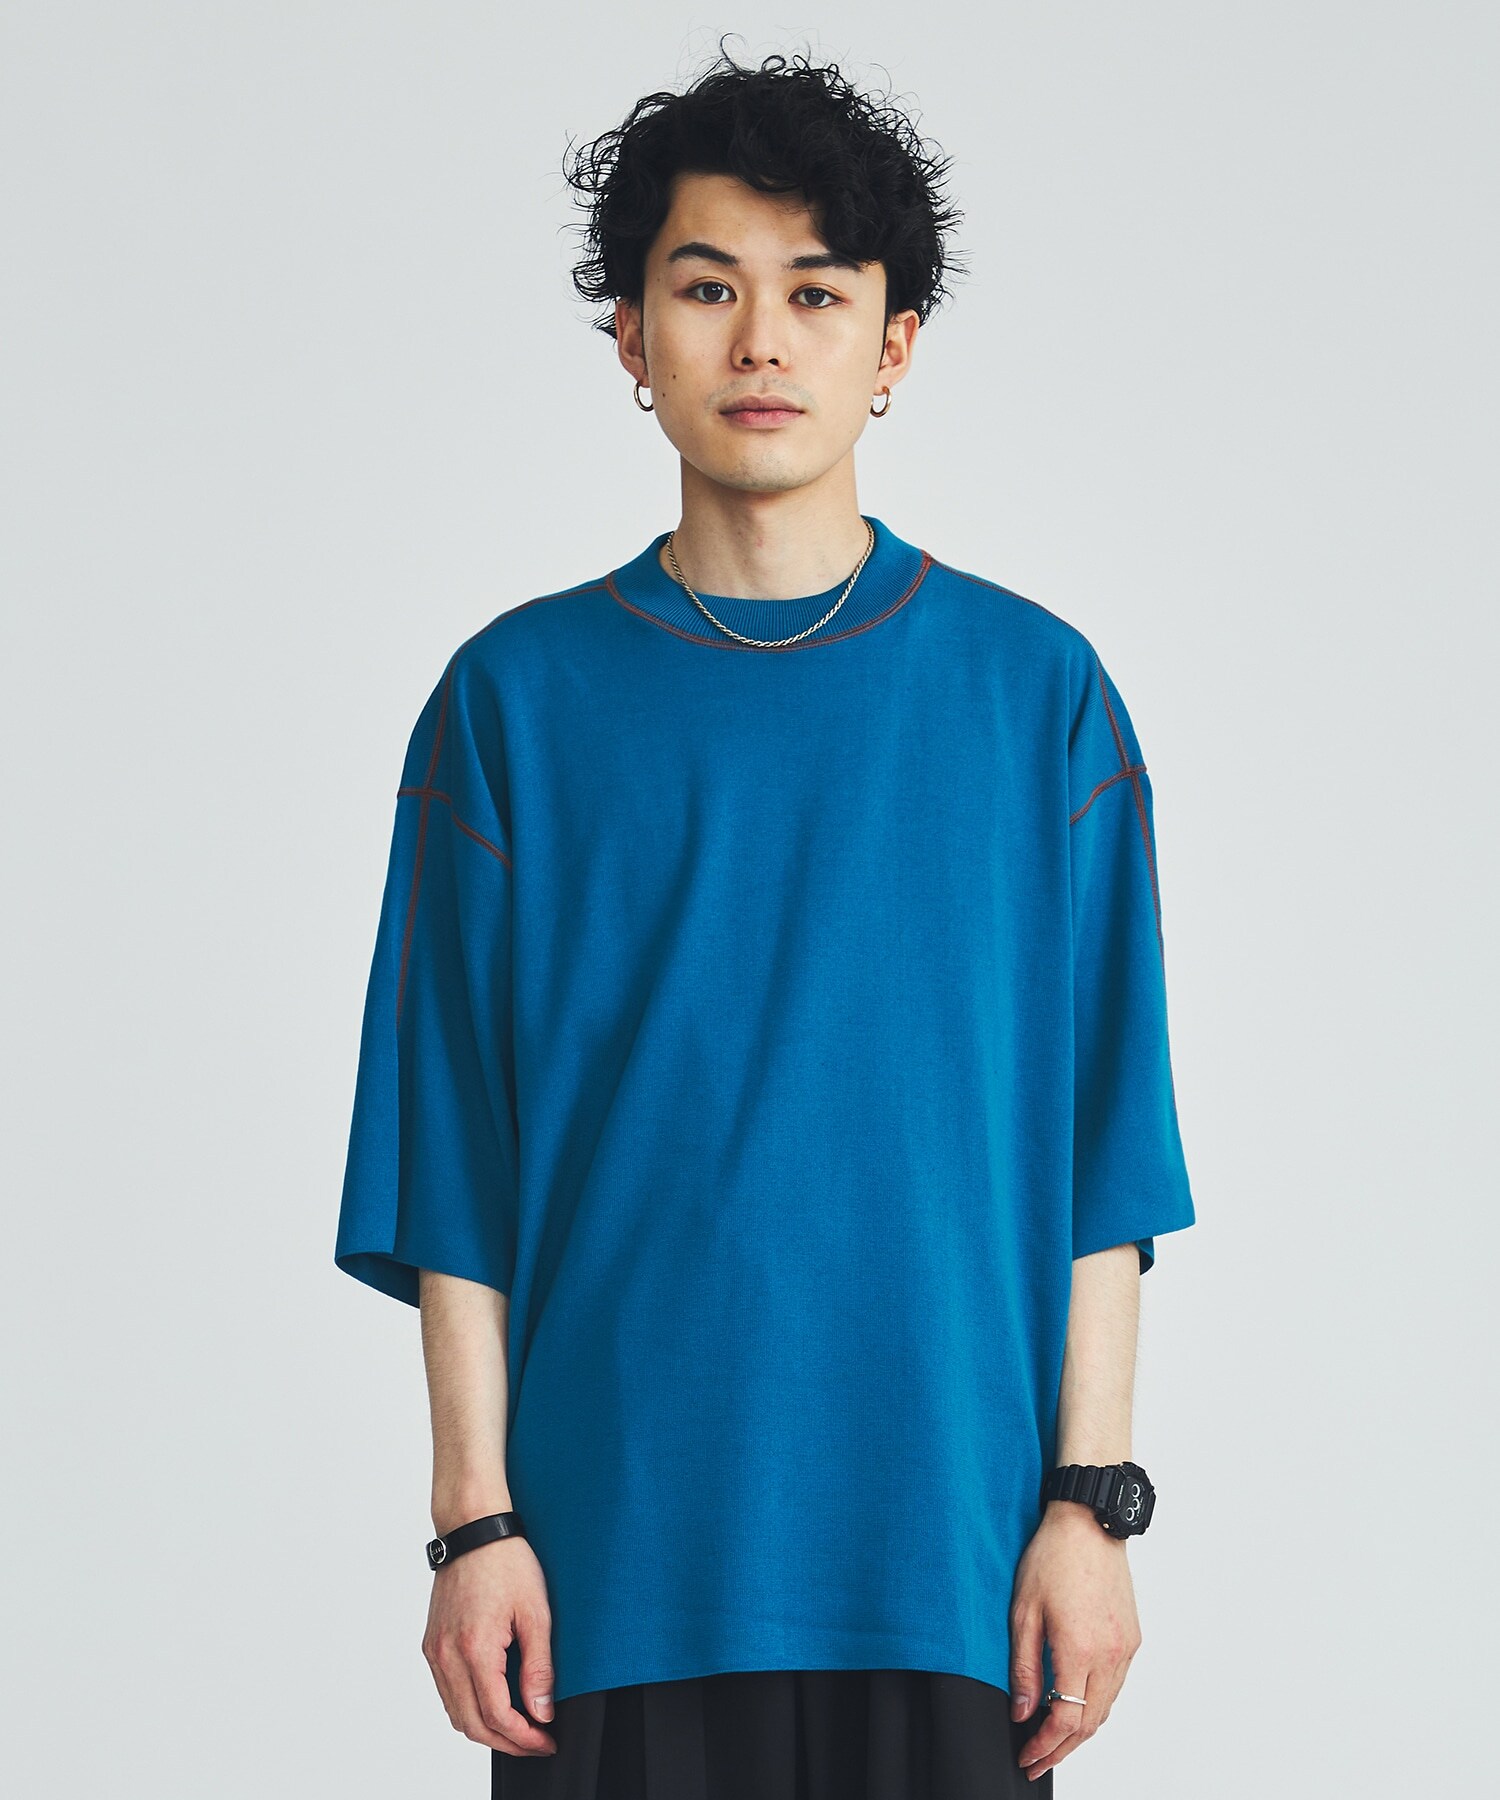 COTTON EMBROIDER CREW NECK S/S KNIT